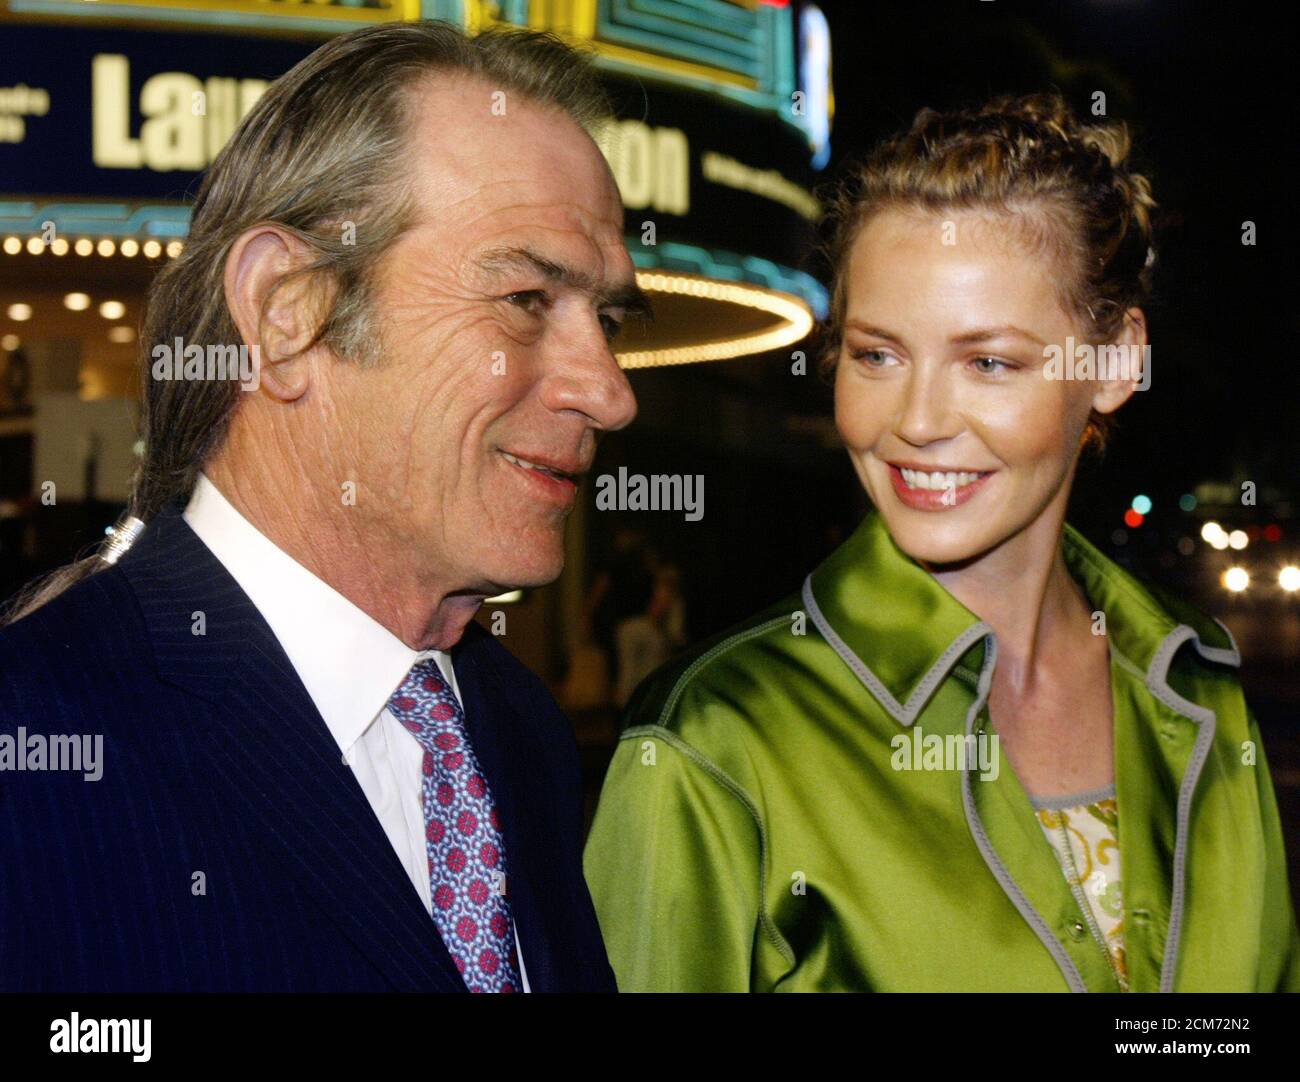 Actor Tommy Lee Jones, sporting a pony tail, and co-star actress Connie  Nielson pose together at the premiere of their new psychological thriller  film 